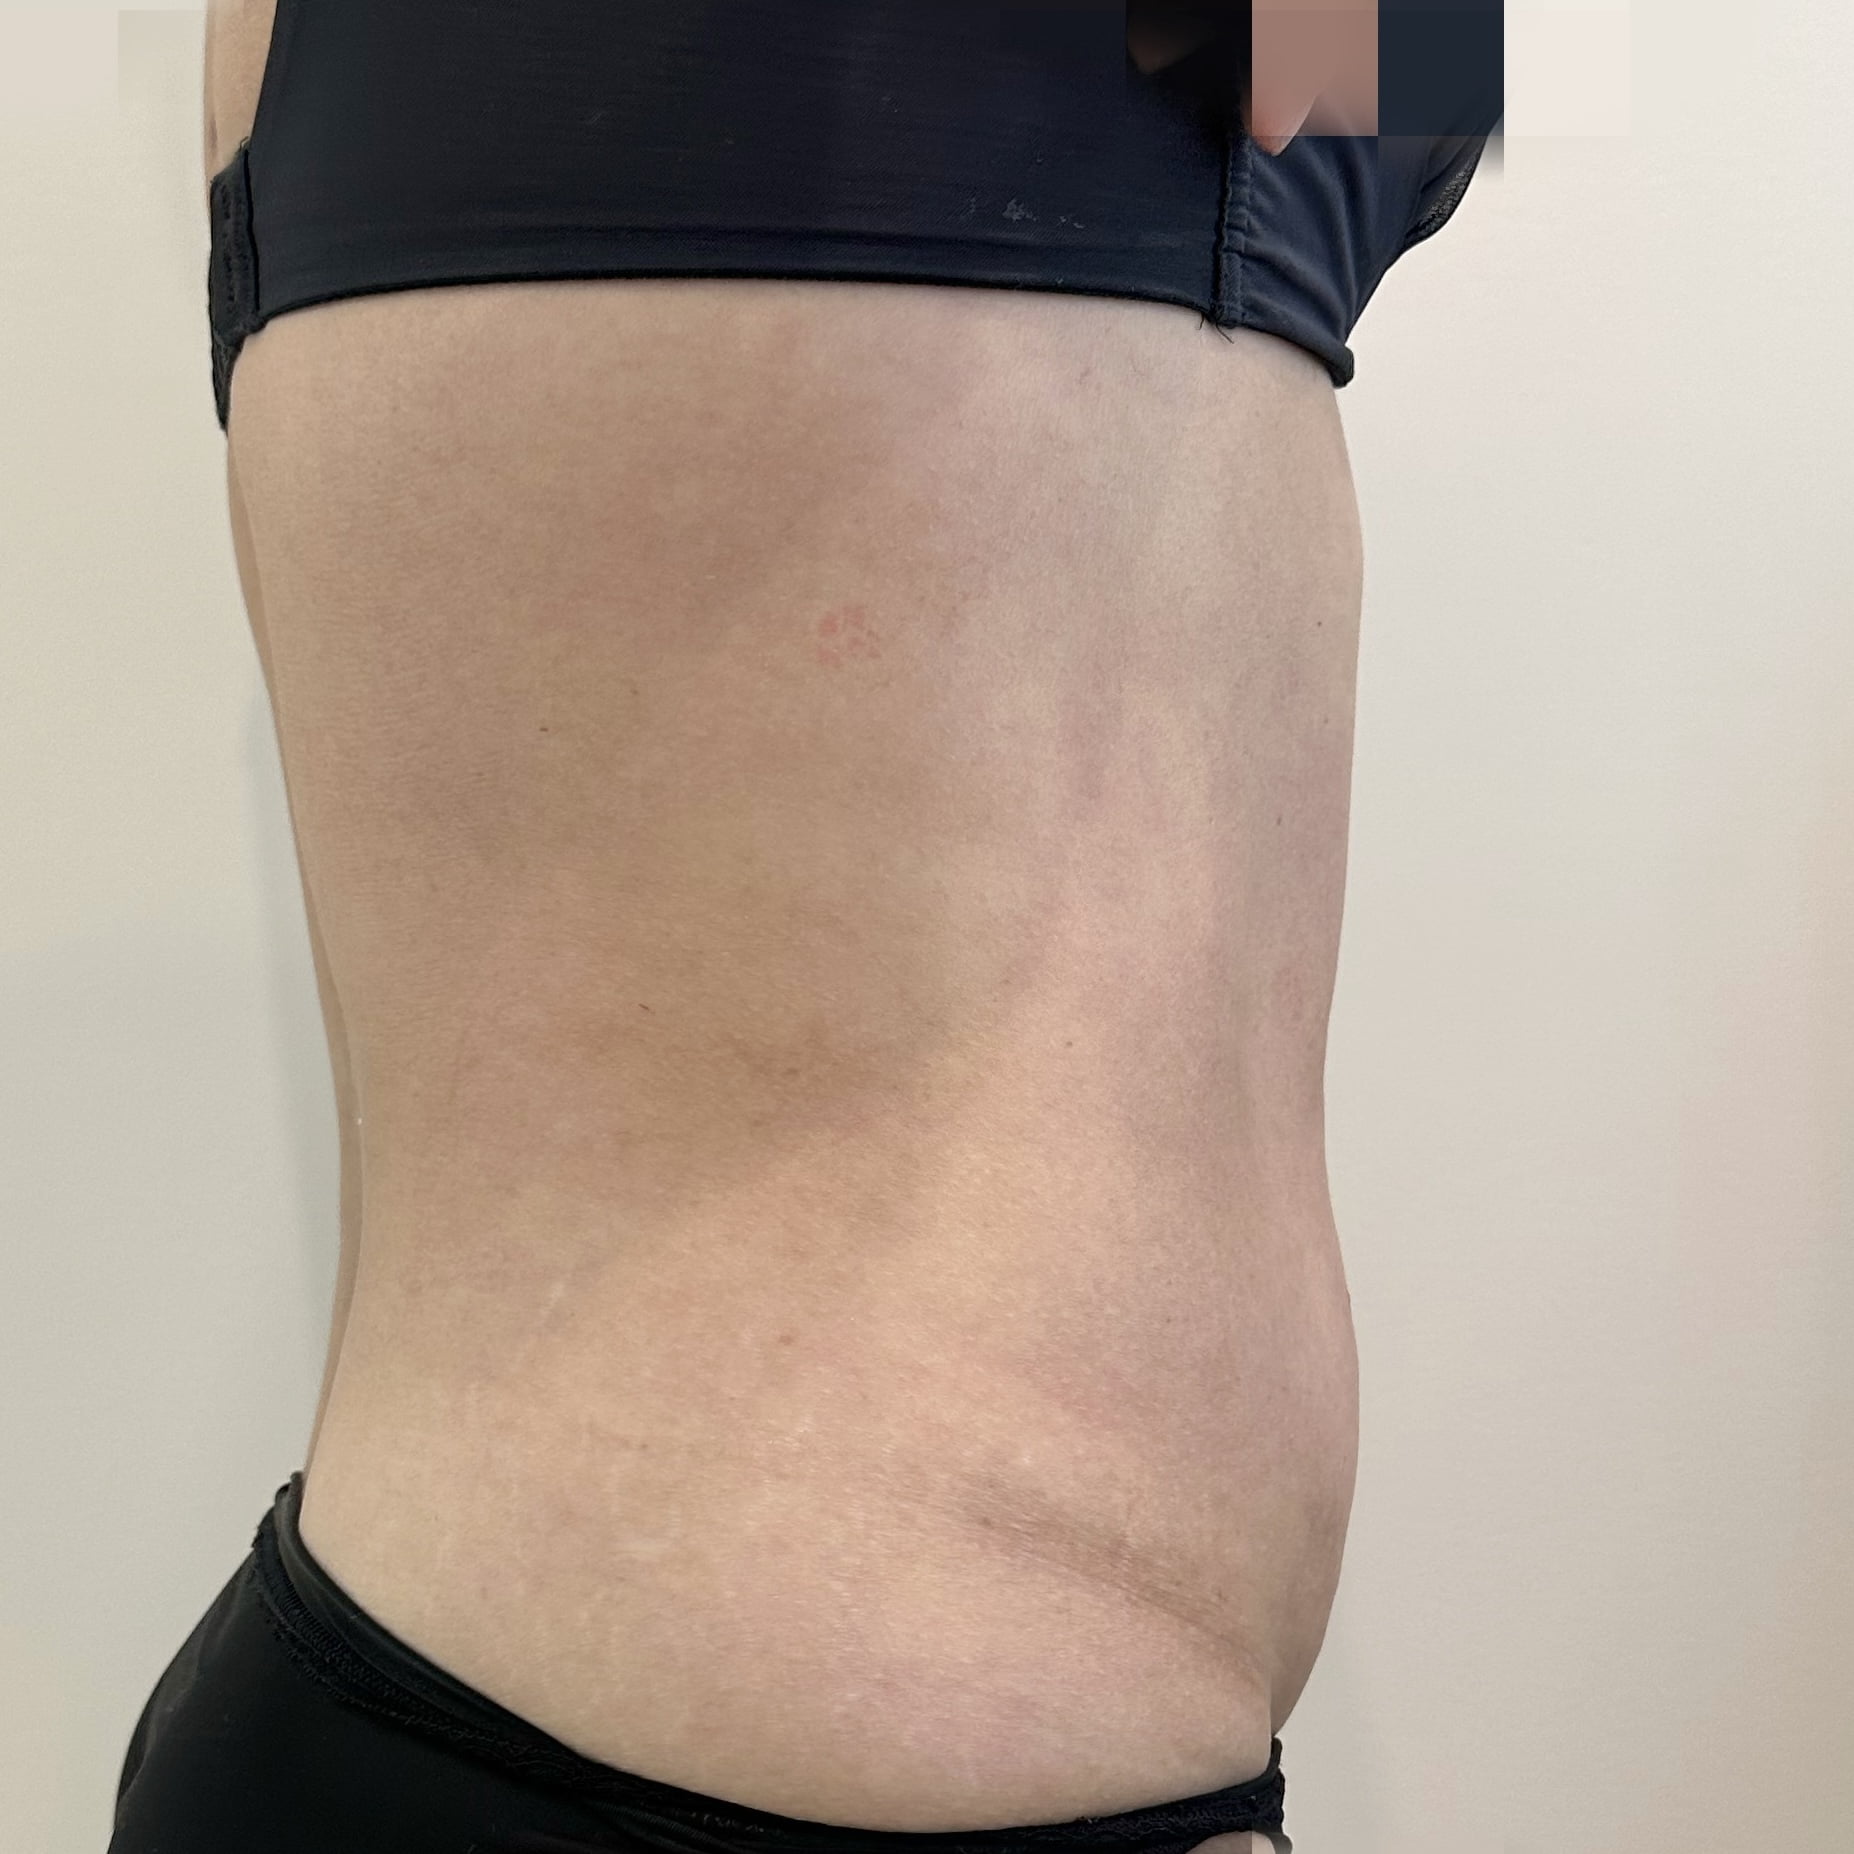 Client after 1 session of Ultraformer III skin tightening for tummy